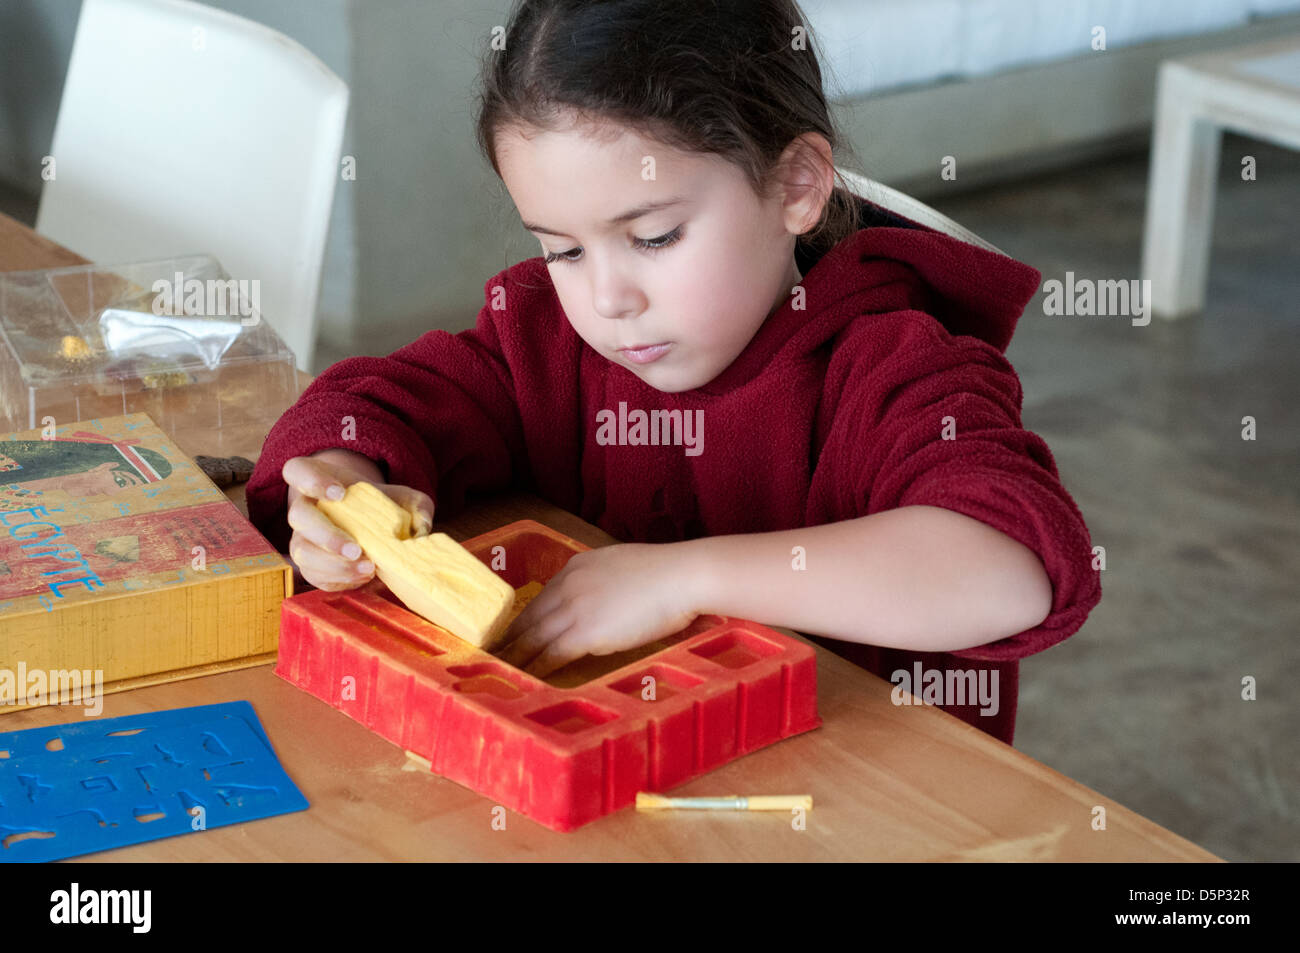 Girl and crafts Stock Photo